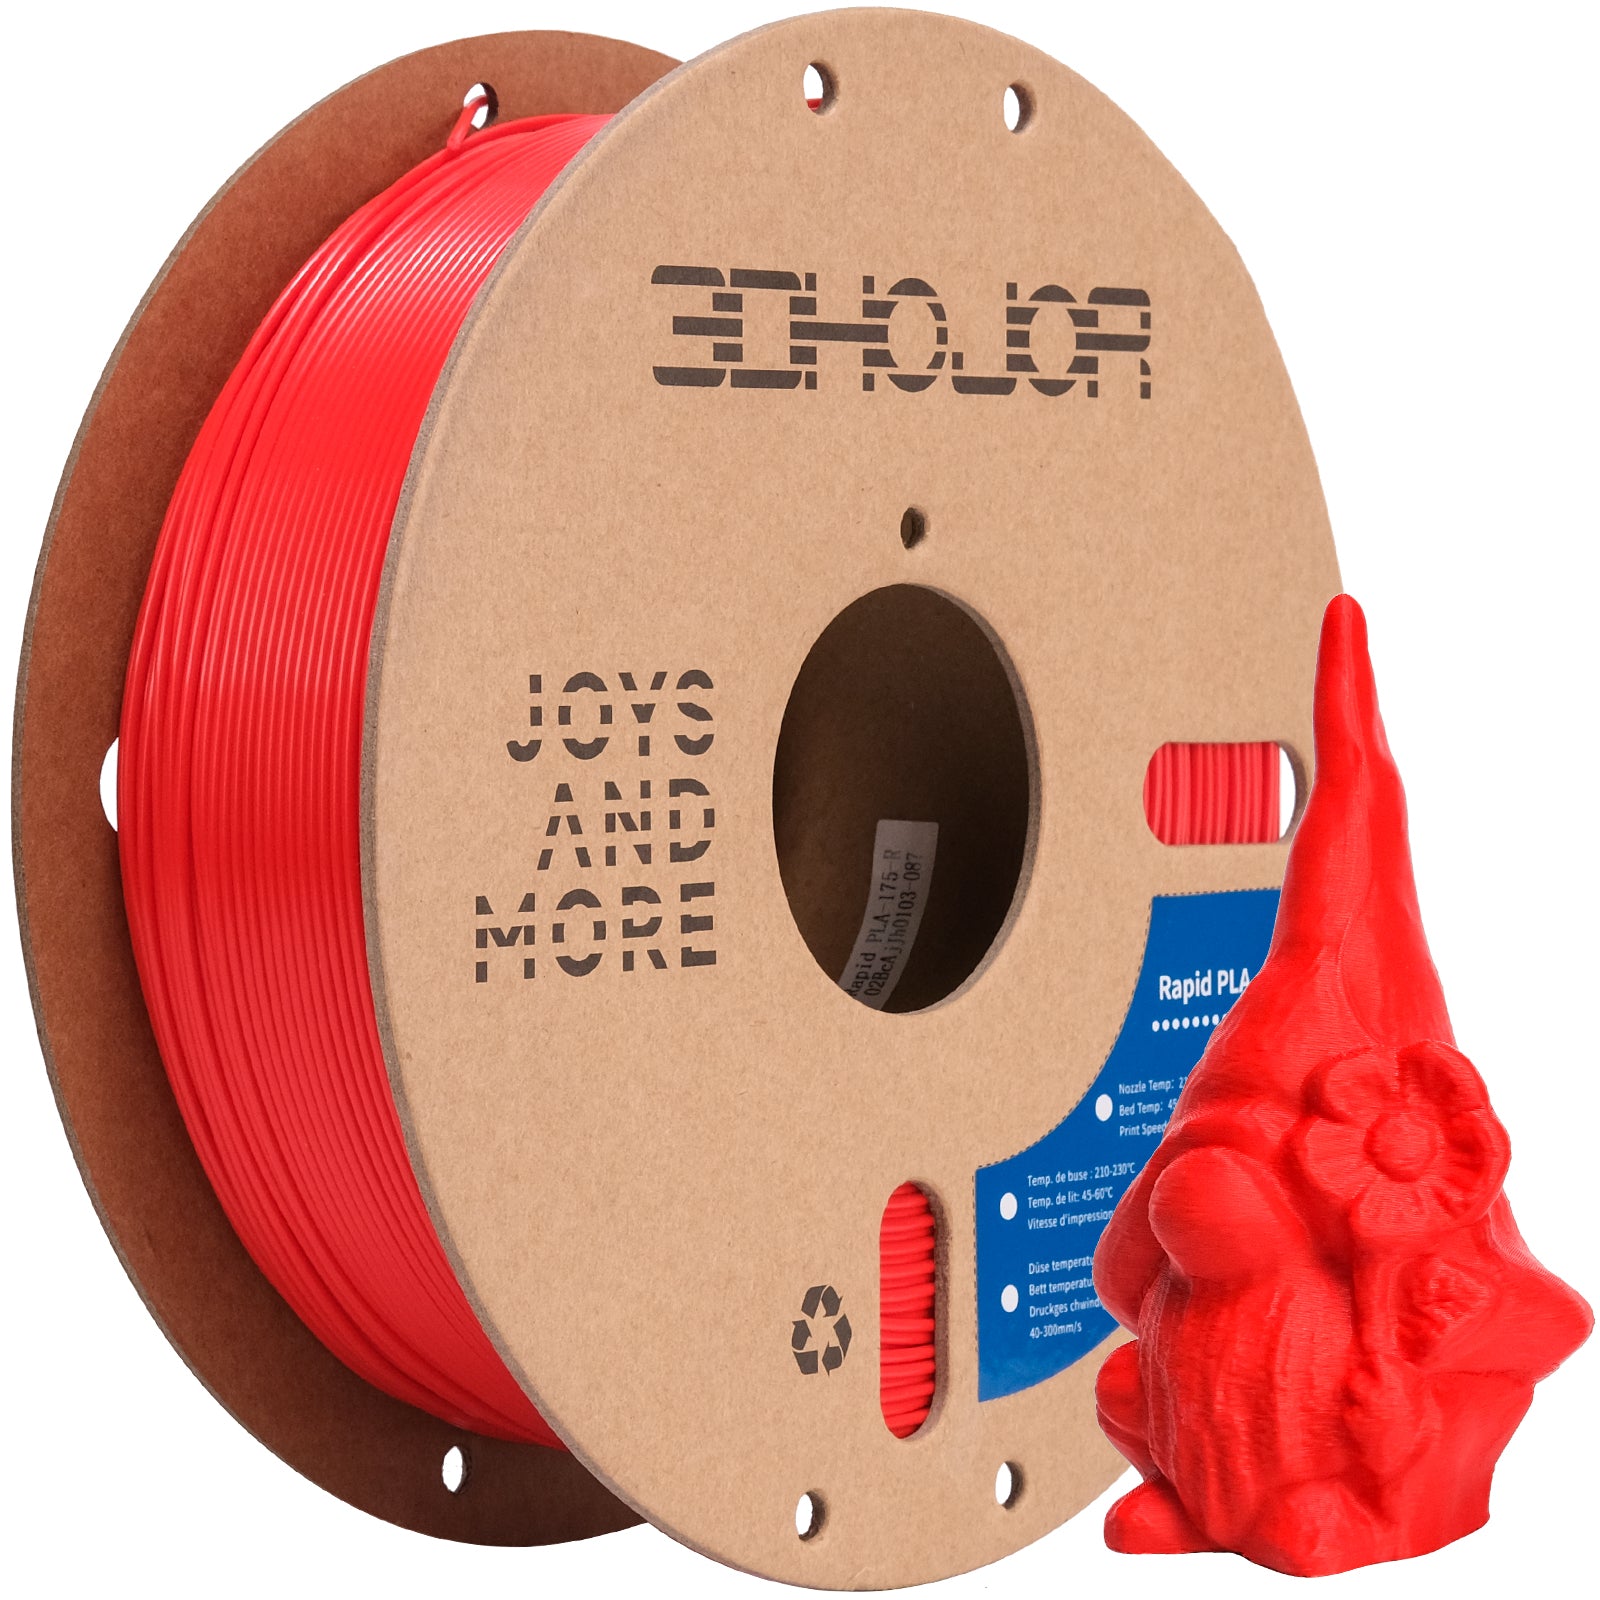 3DHoJor PLA High Speed Printer Filament 1.75mm 1kg Cardboard Spool (2.2lbs) Rapid PLA to 5X Faster Printing Filament PLA Dimensional Accuracy +/- 0.02 mm Fits for Most FDM 3D Printer -Red